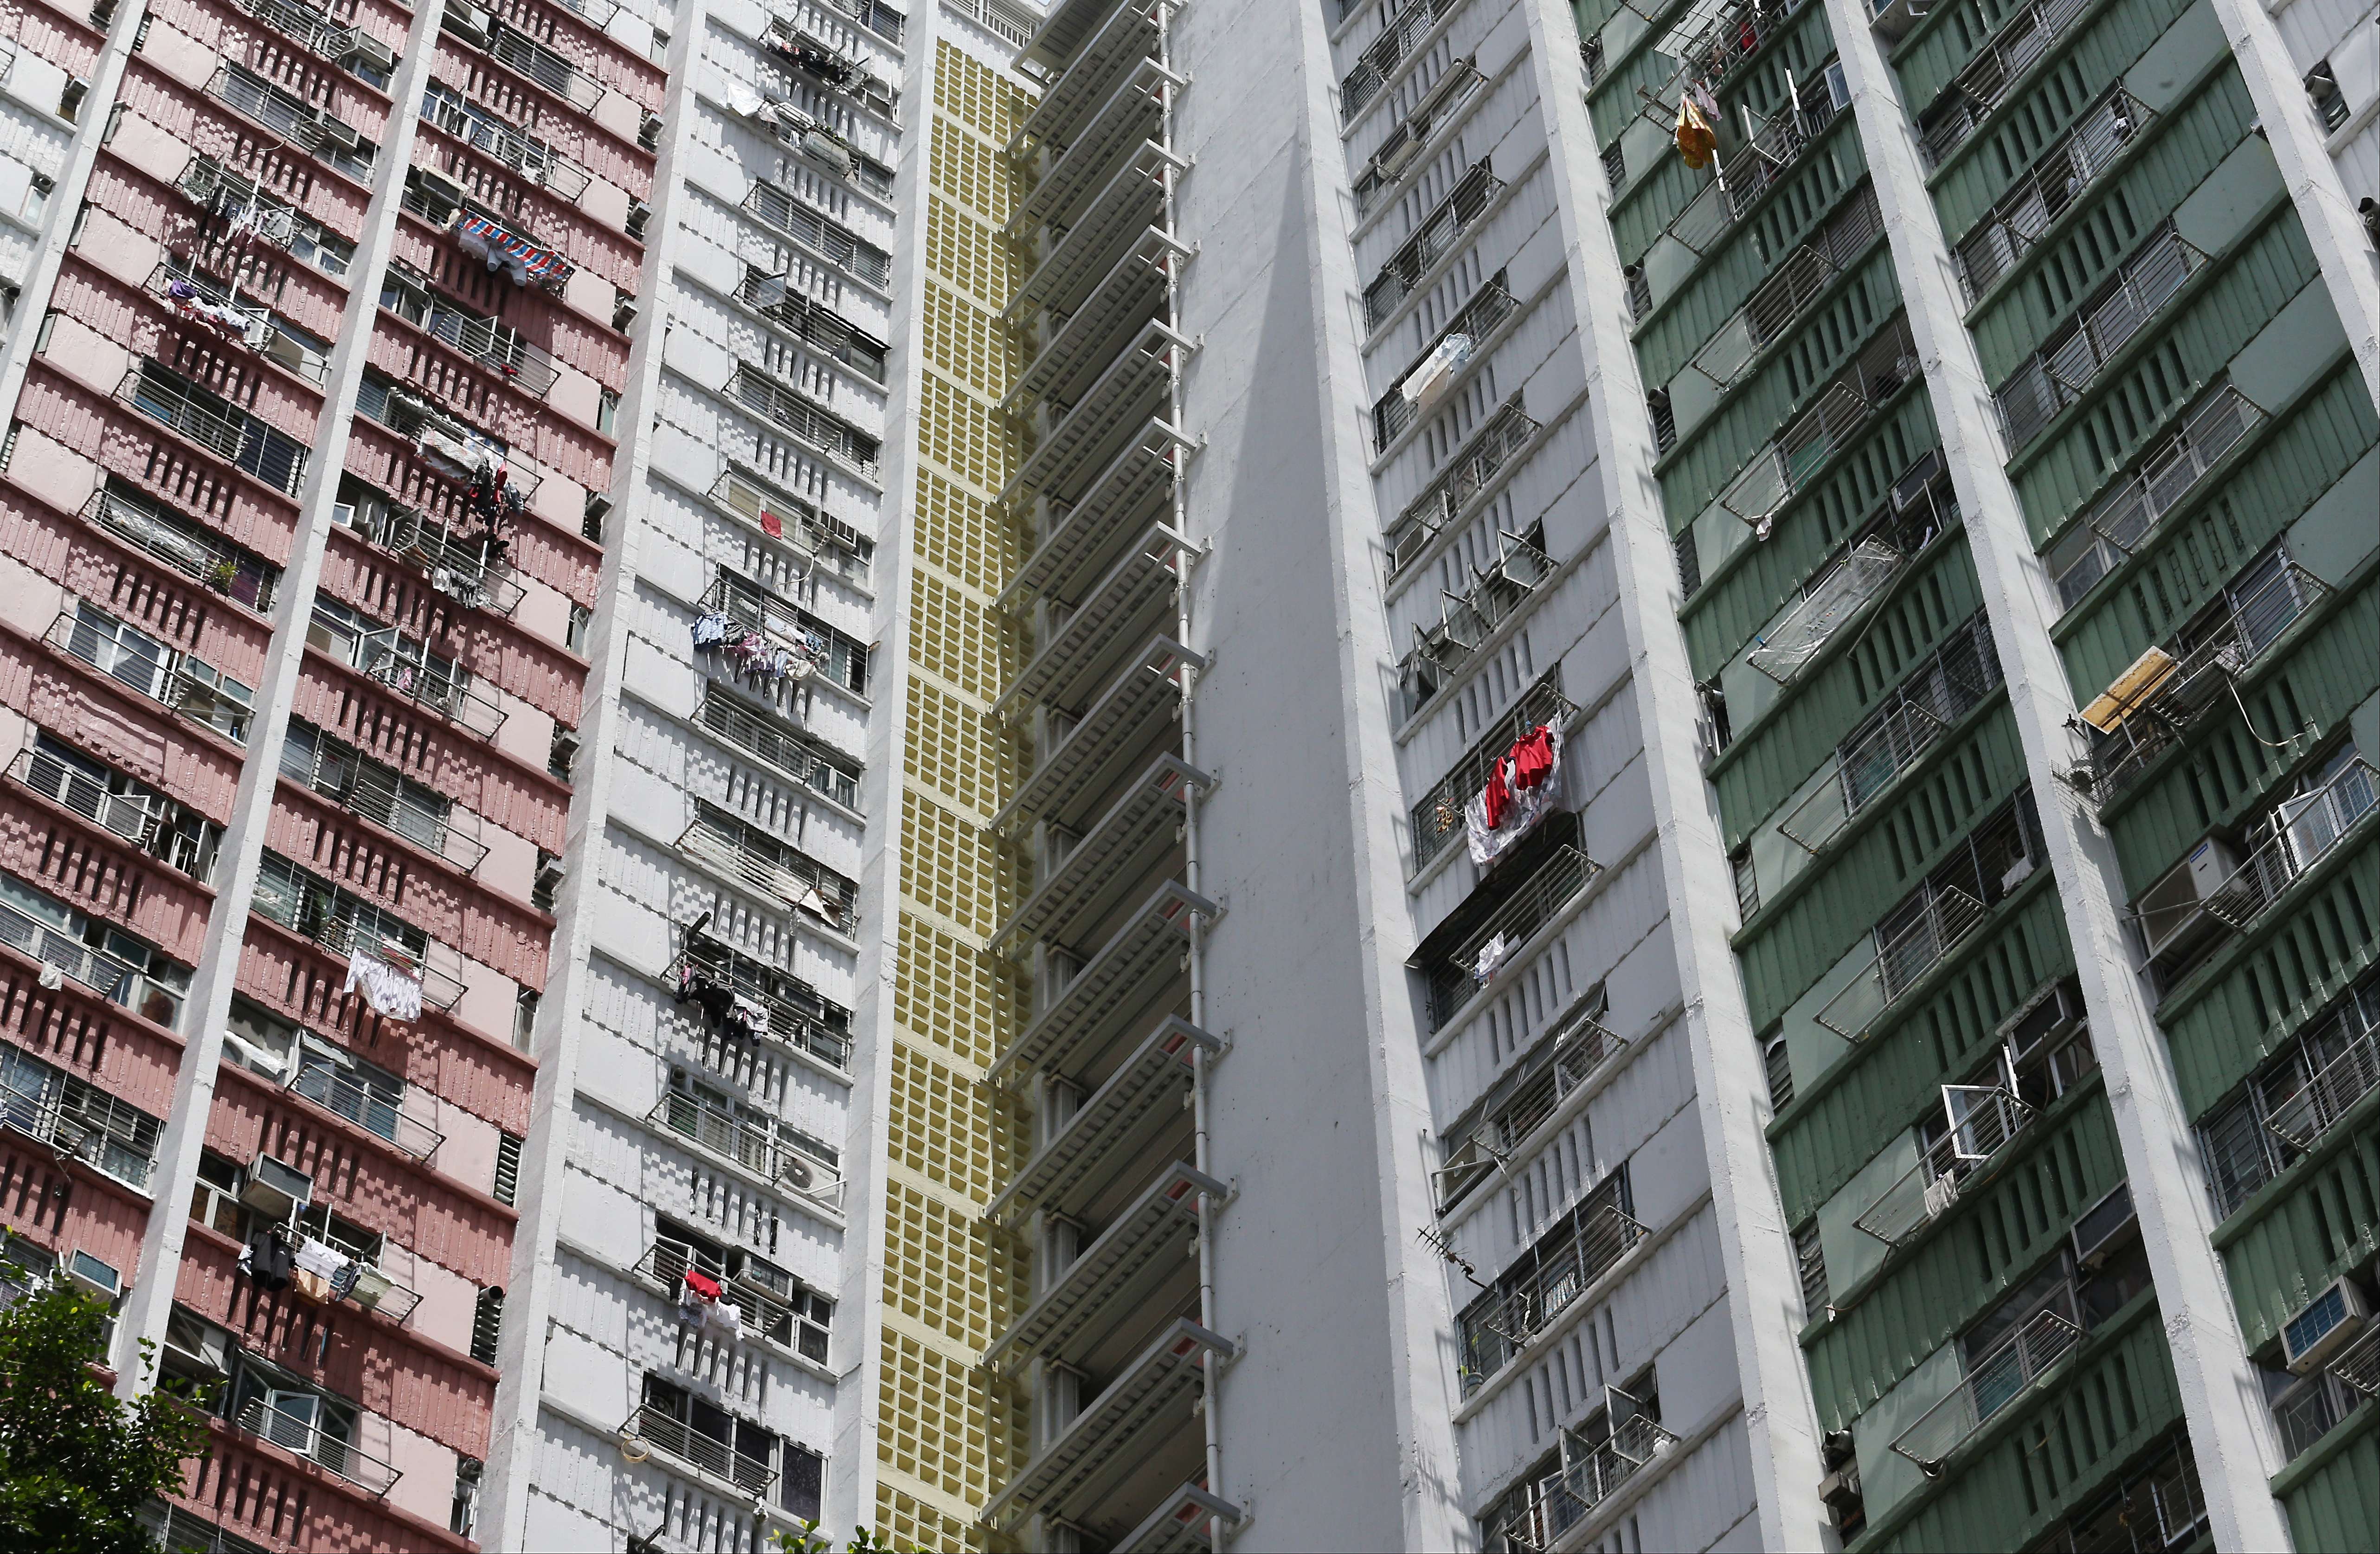 Experts say public housing tenants have low confidence in reparation works outsourced by the government. Photo: Felix Wong